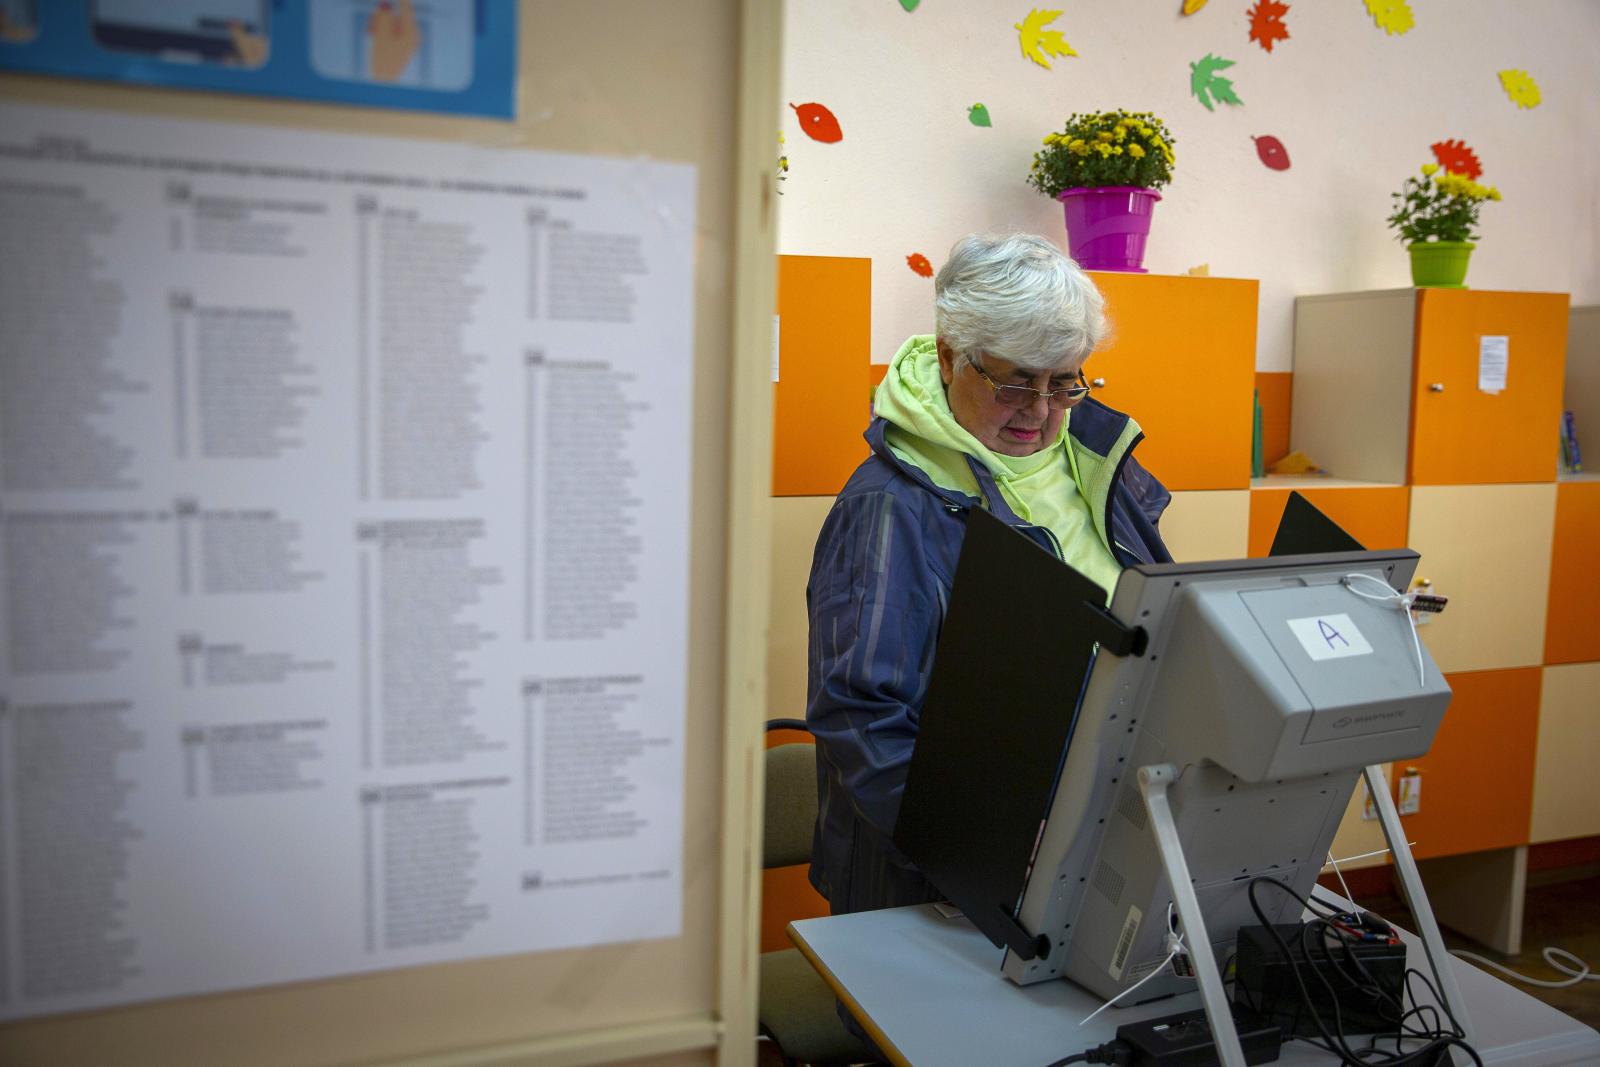 A woman casts her vote at a polling station in Bankya, Bulgaria.